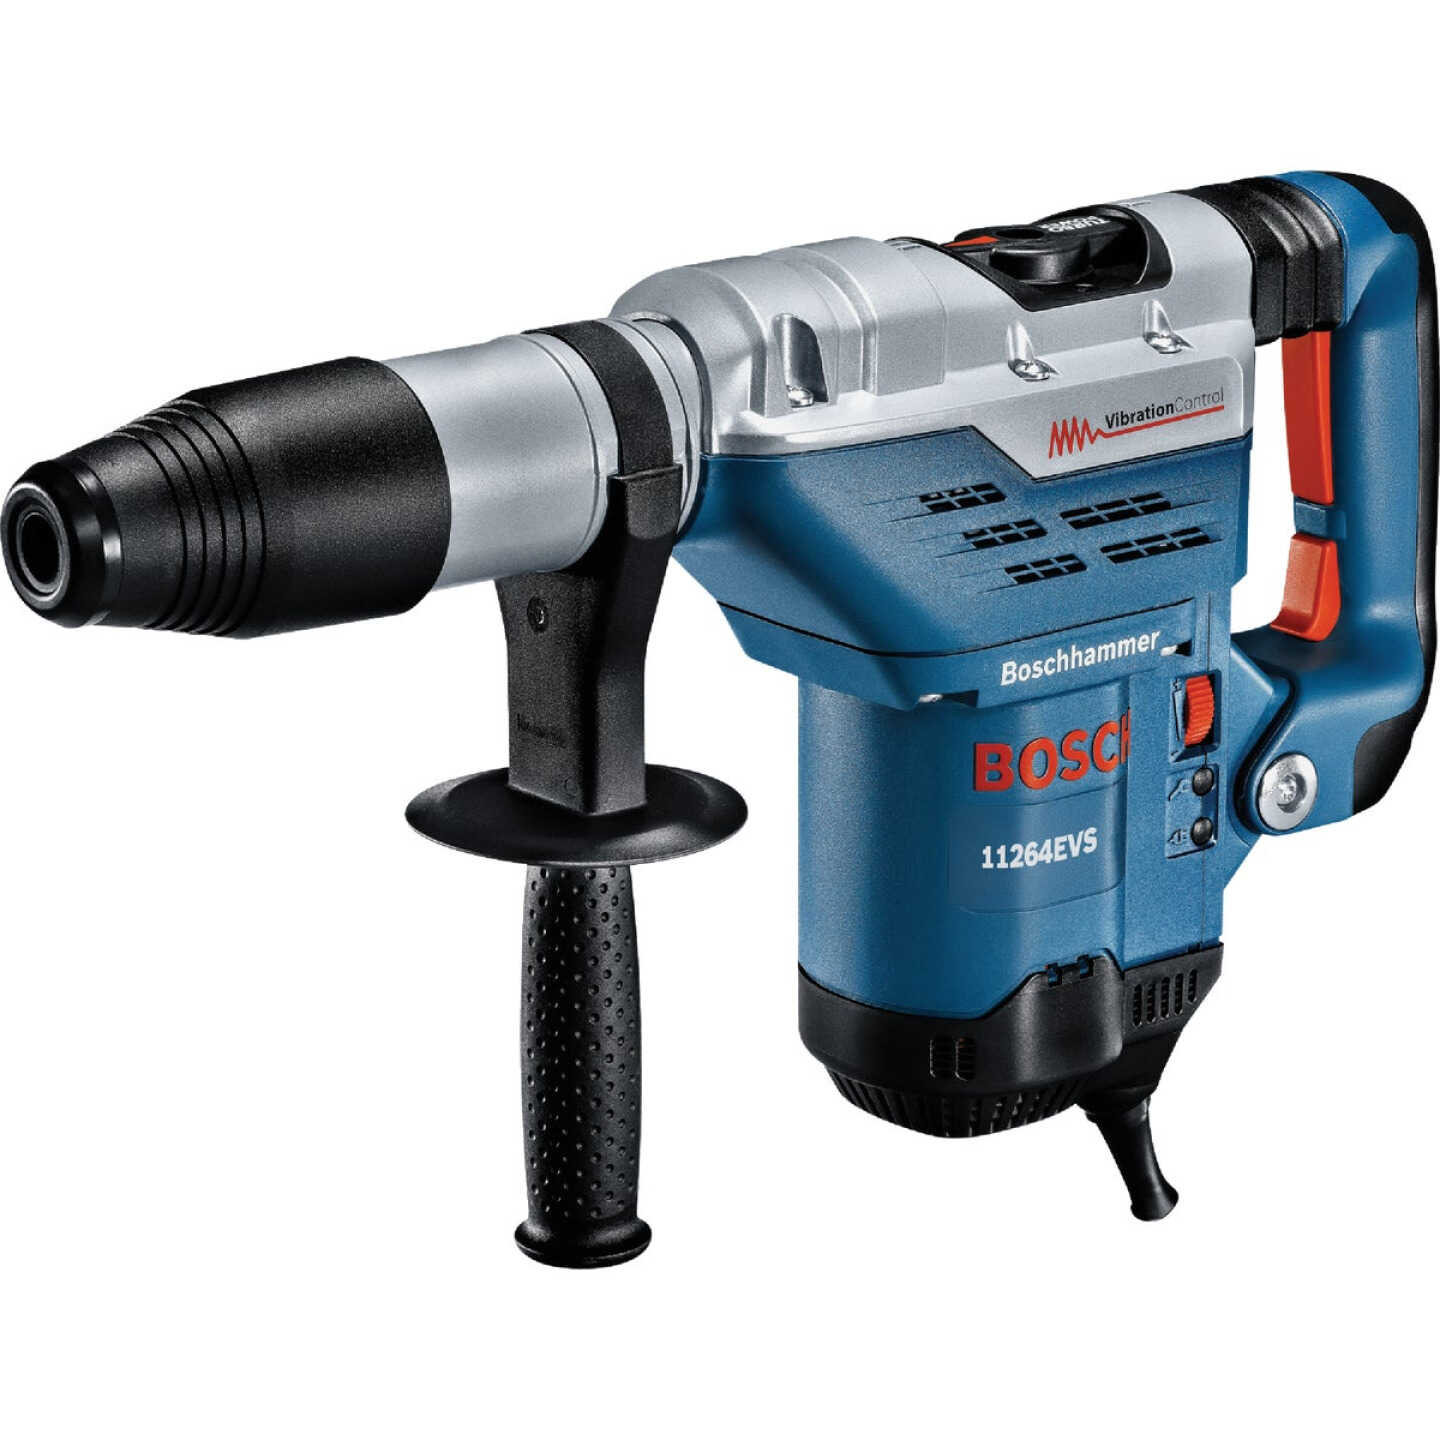 Drill 3.0-Amp In. - Townsend Company Electric SDS-Max 1-5/8 Hammer Bosch Power Rotary